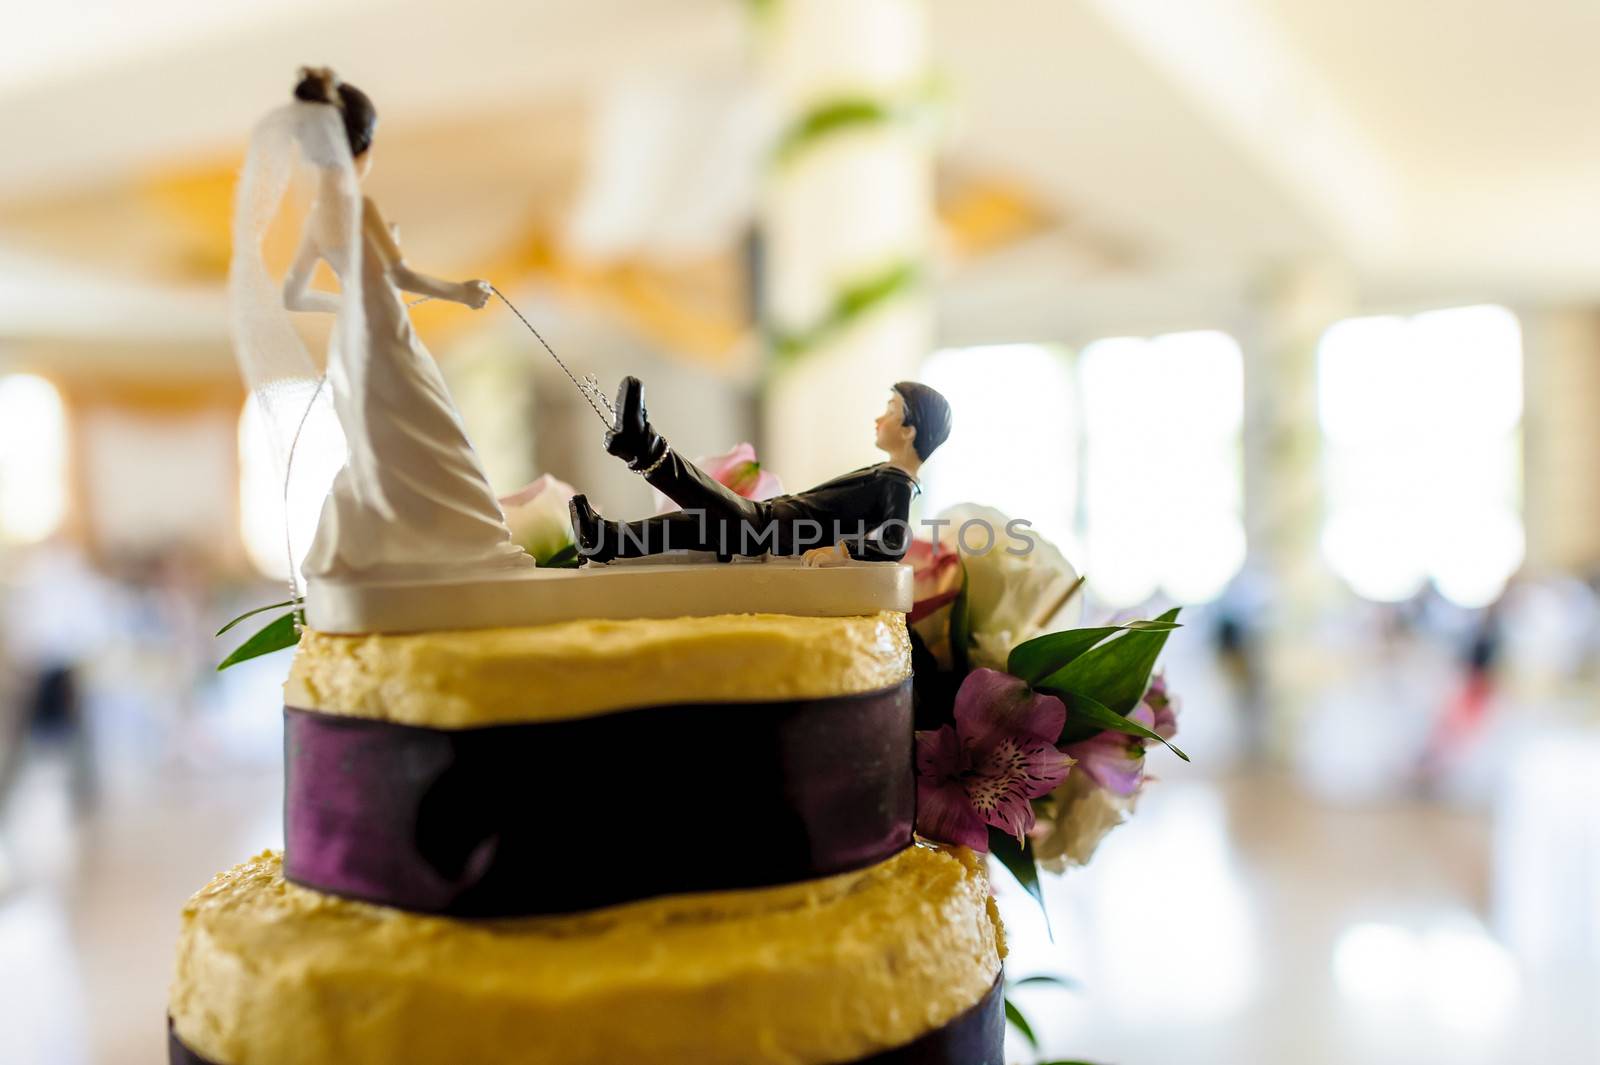 Fragment of yellow and purple wedding cake with funny decoration symbolizing groom pulled by leg on a leash by bride, wedding hall in background.